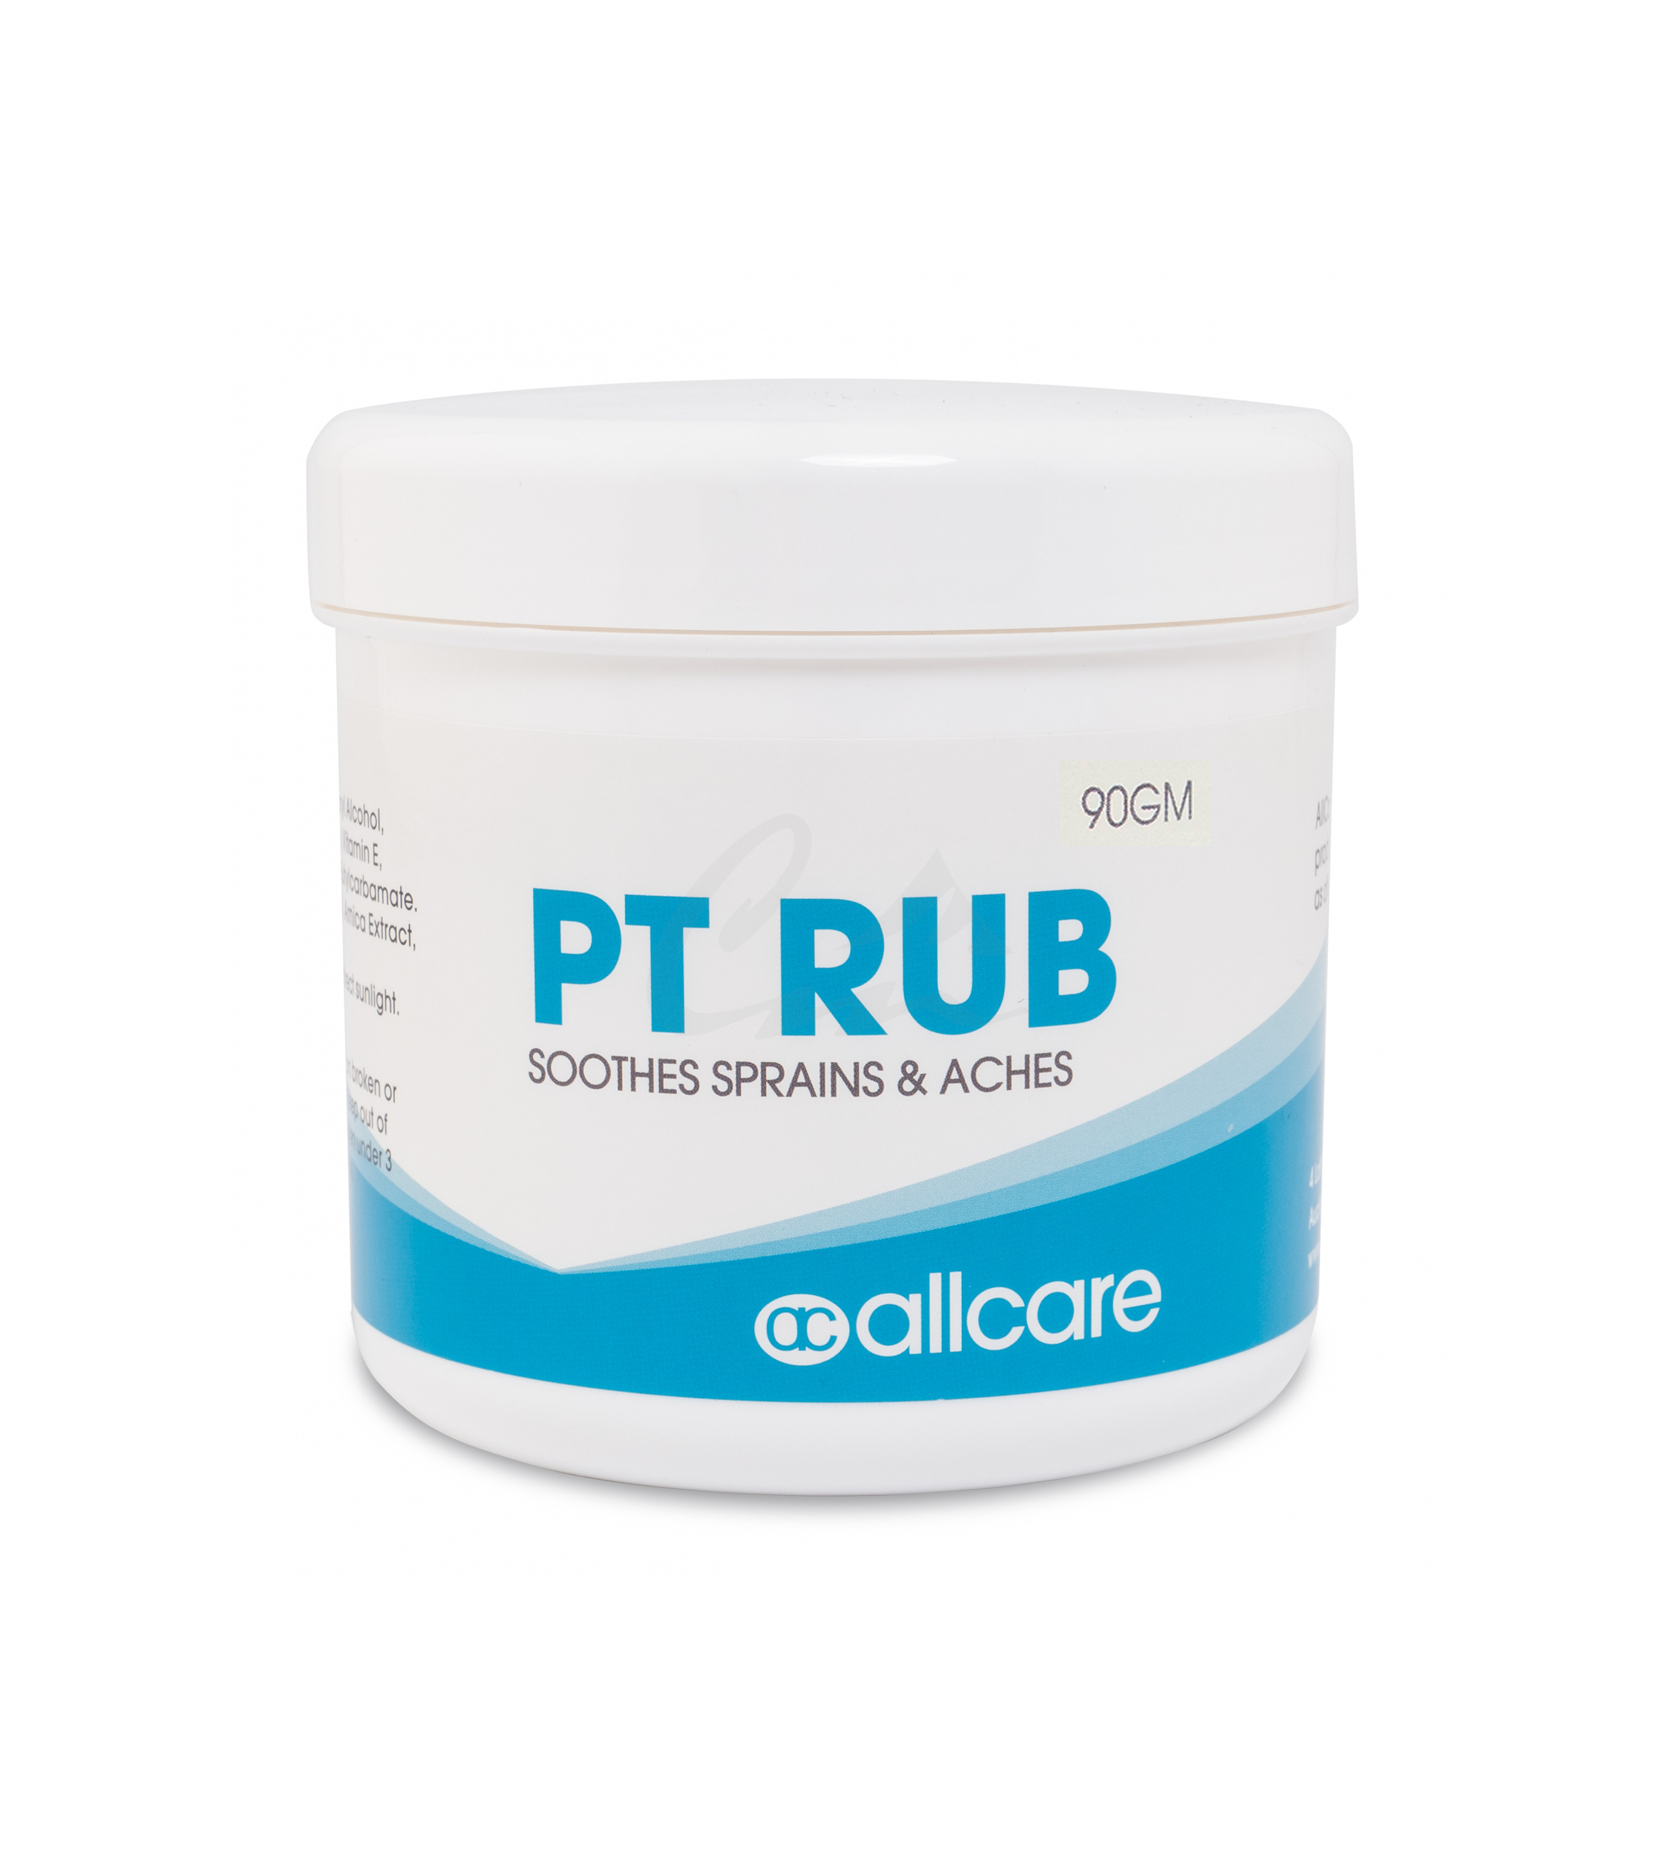 Allcare PT Rub Reduces Swelling and Pain 90gm Pot image 0